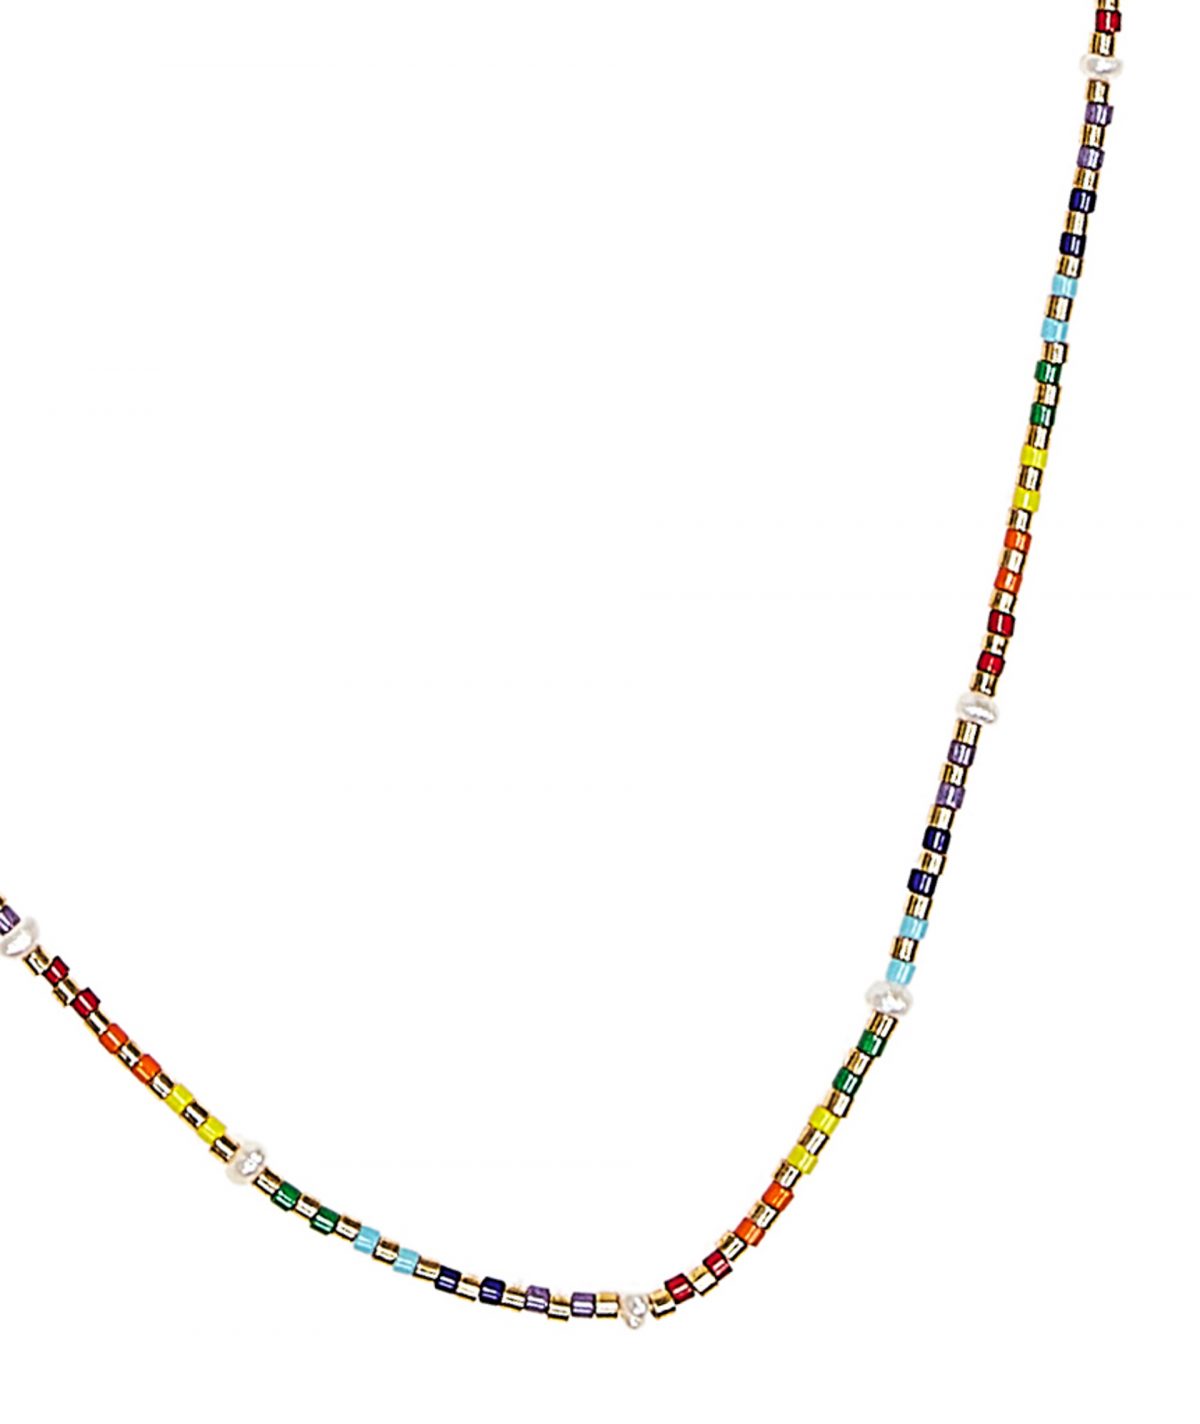 Multicoloured Stones and Pearl Necklace by TFD